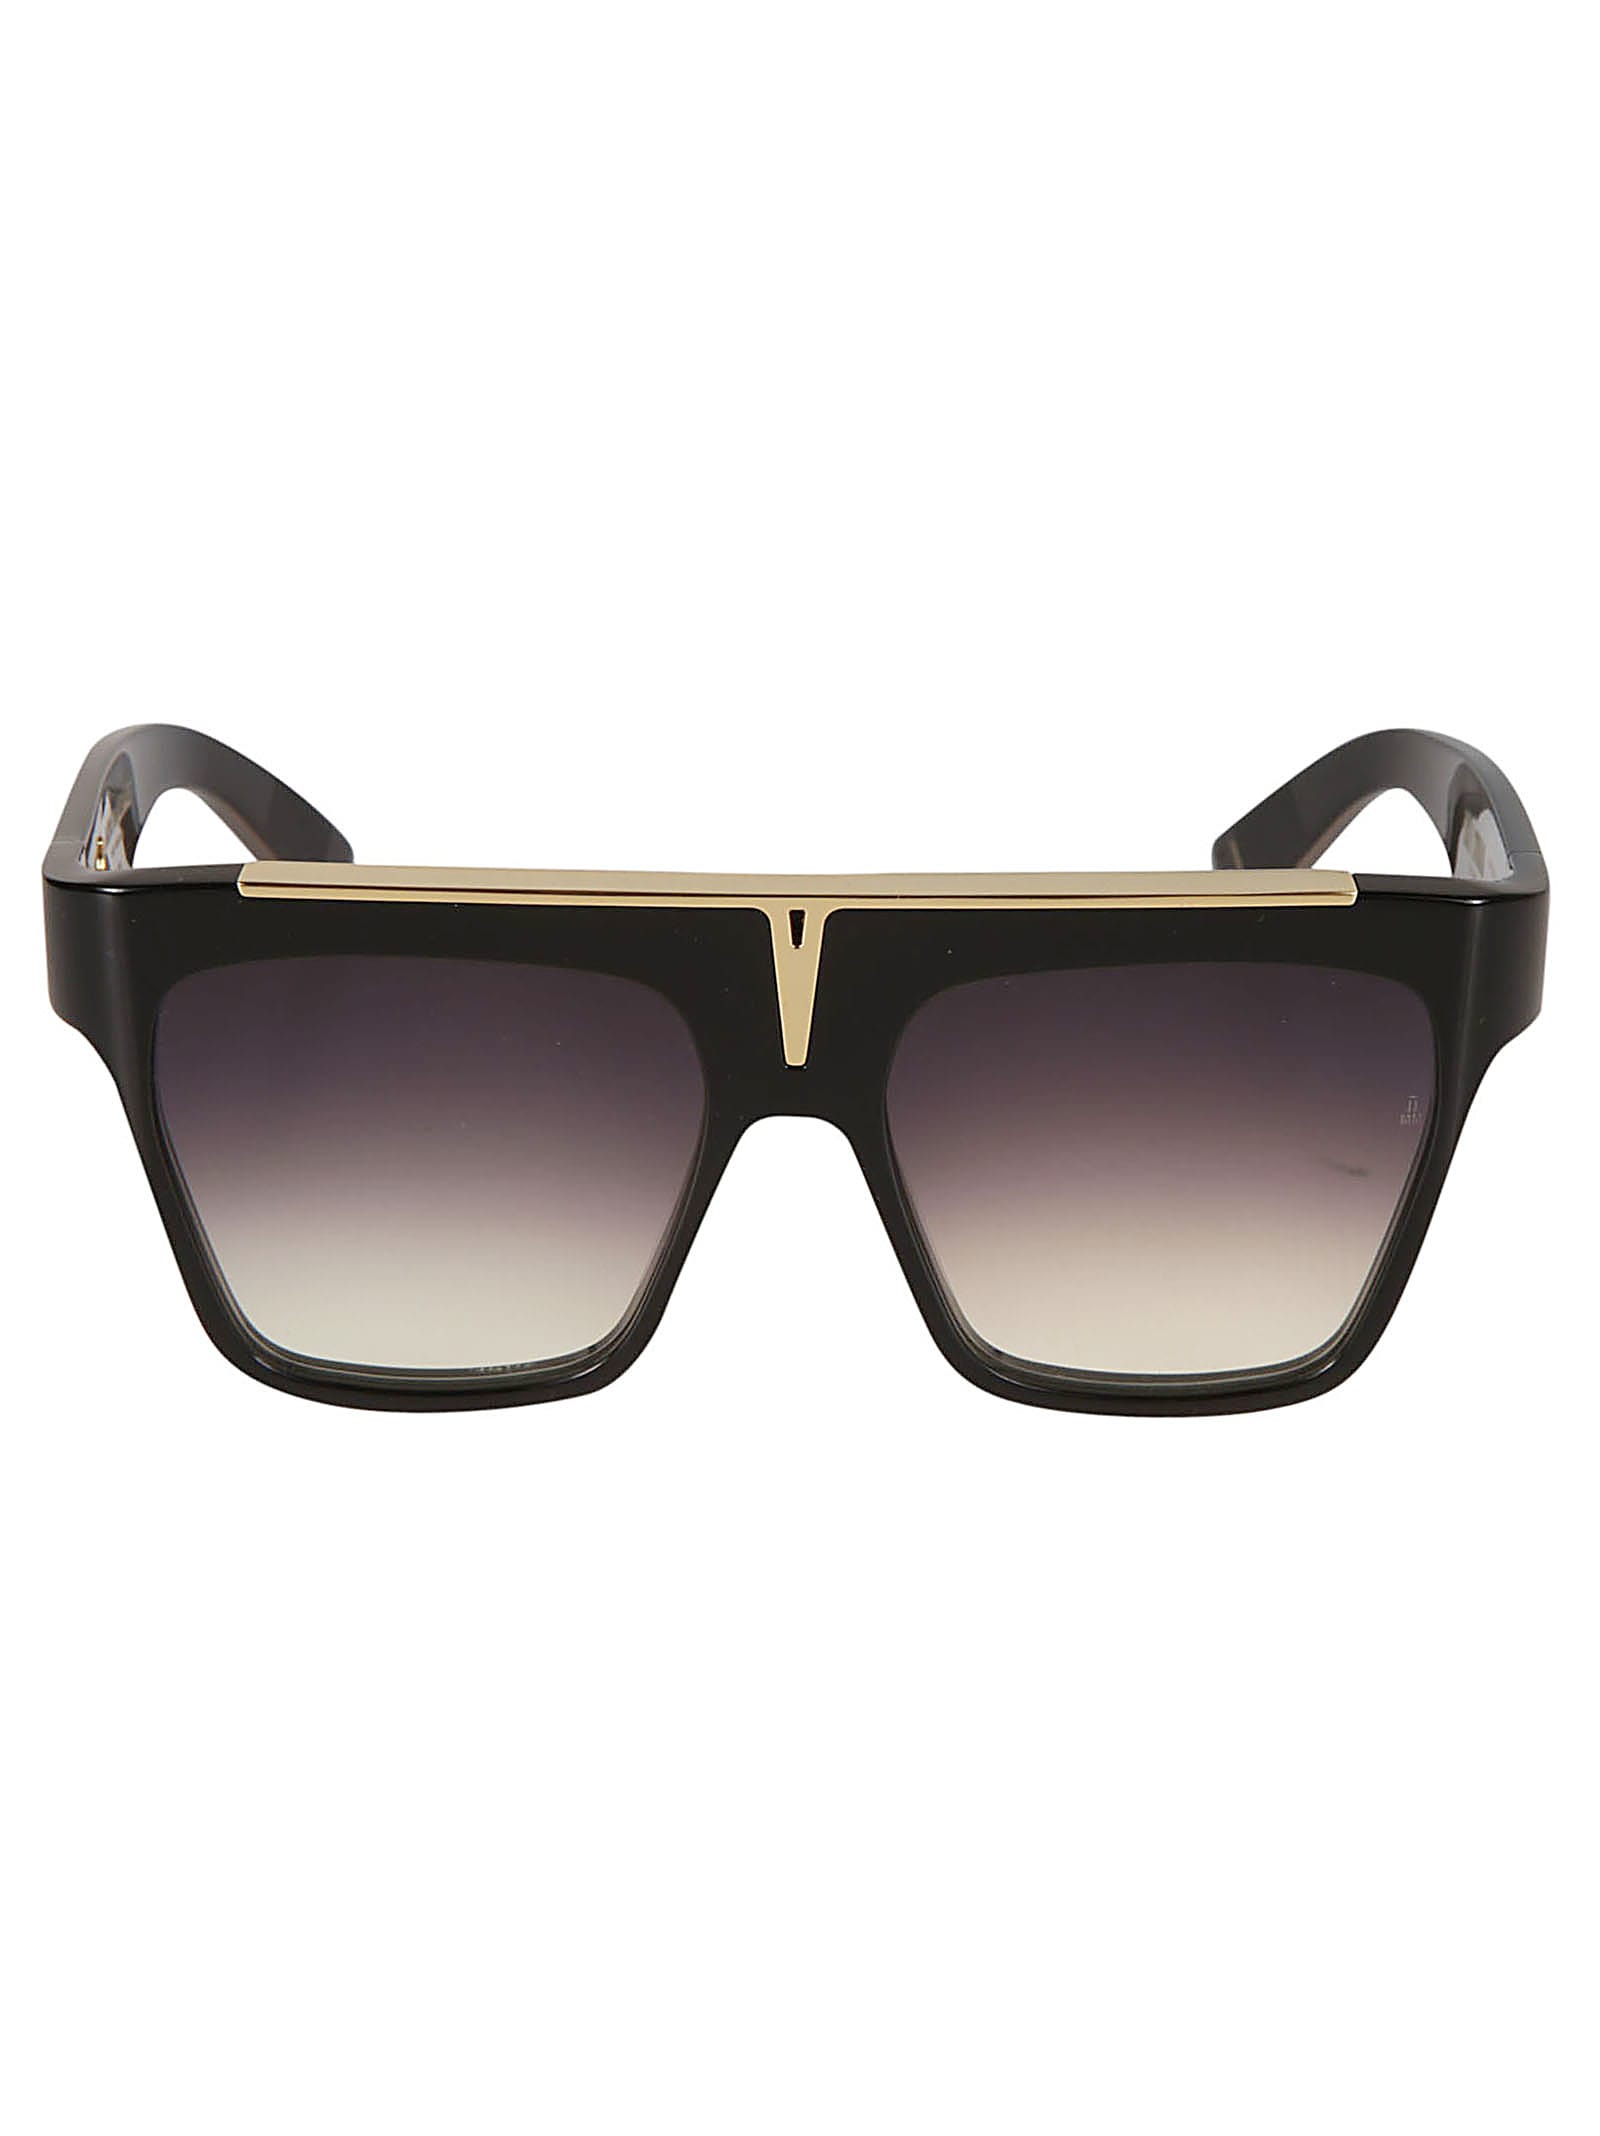 Jacques Marie Mage Selini Sunglasses In Black